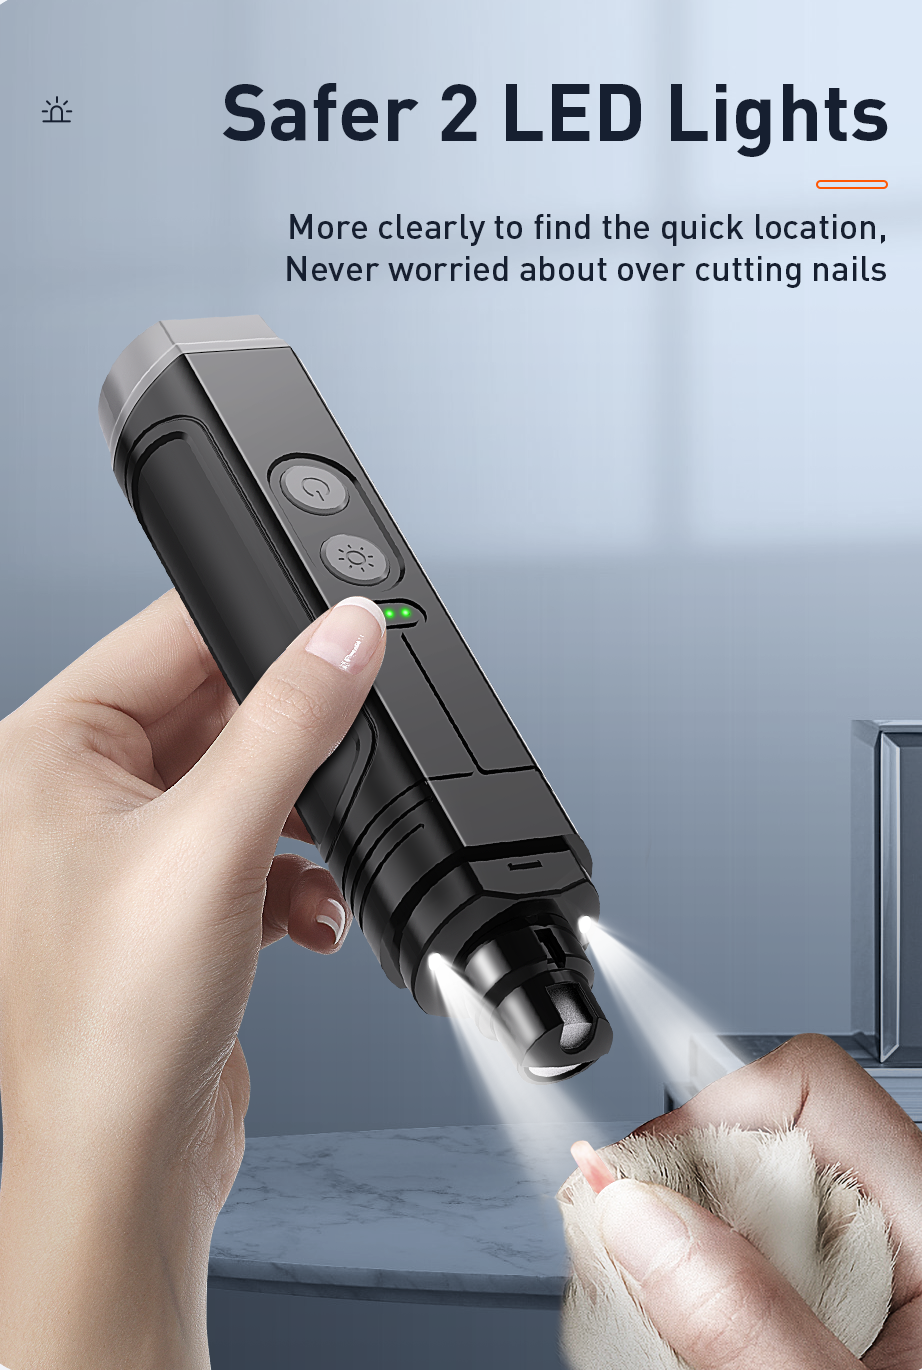 Get precise dog nail care with our Nail Trimmer for Dogs. Our dog nail clipper ensures safe trimming, promoting healthy paws. 